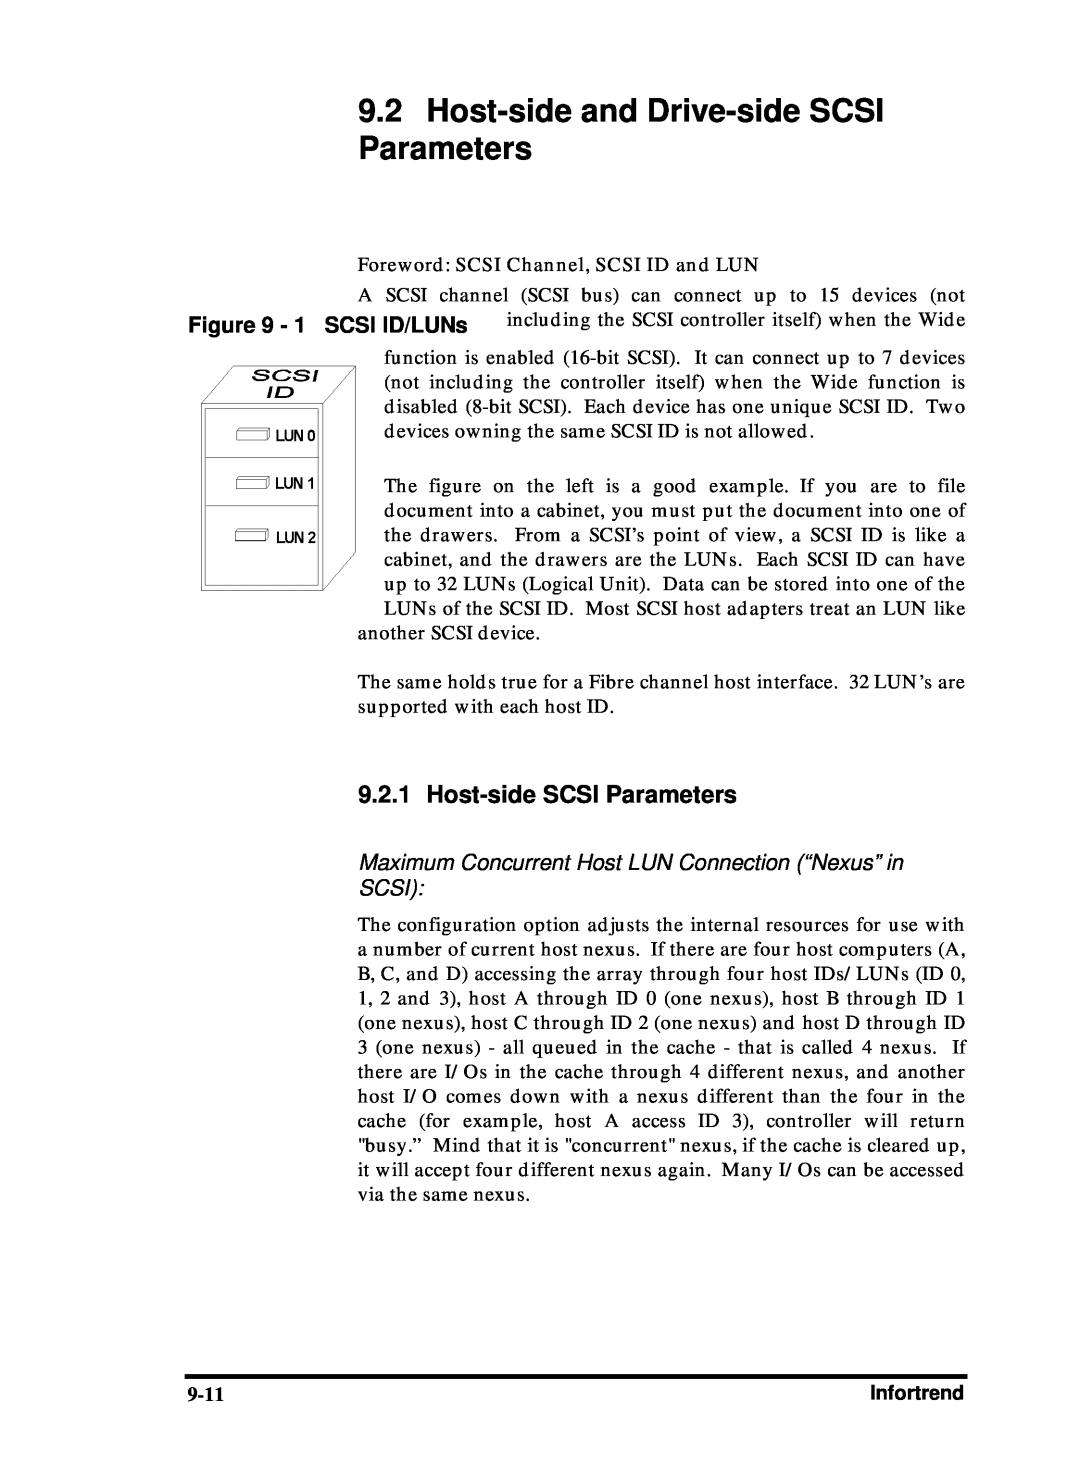 Compaq Infortrend manual Host-side and Drive-side SCSI Parameters, Host-side SCSI Parameters 